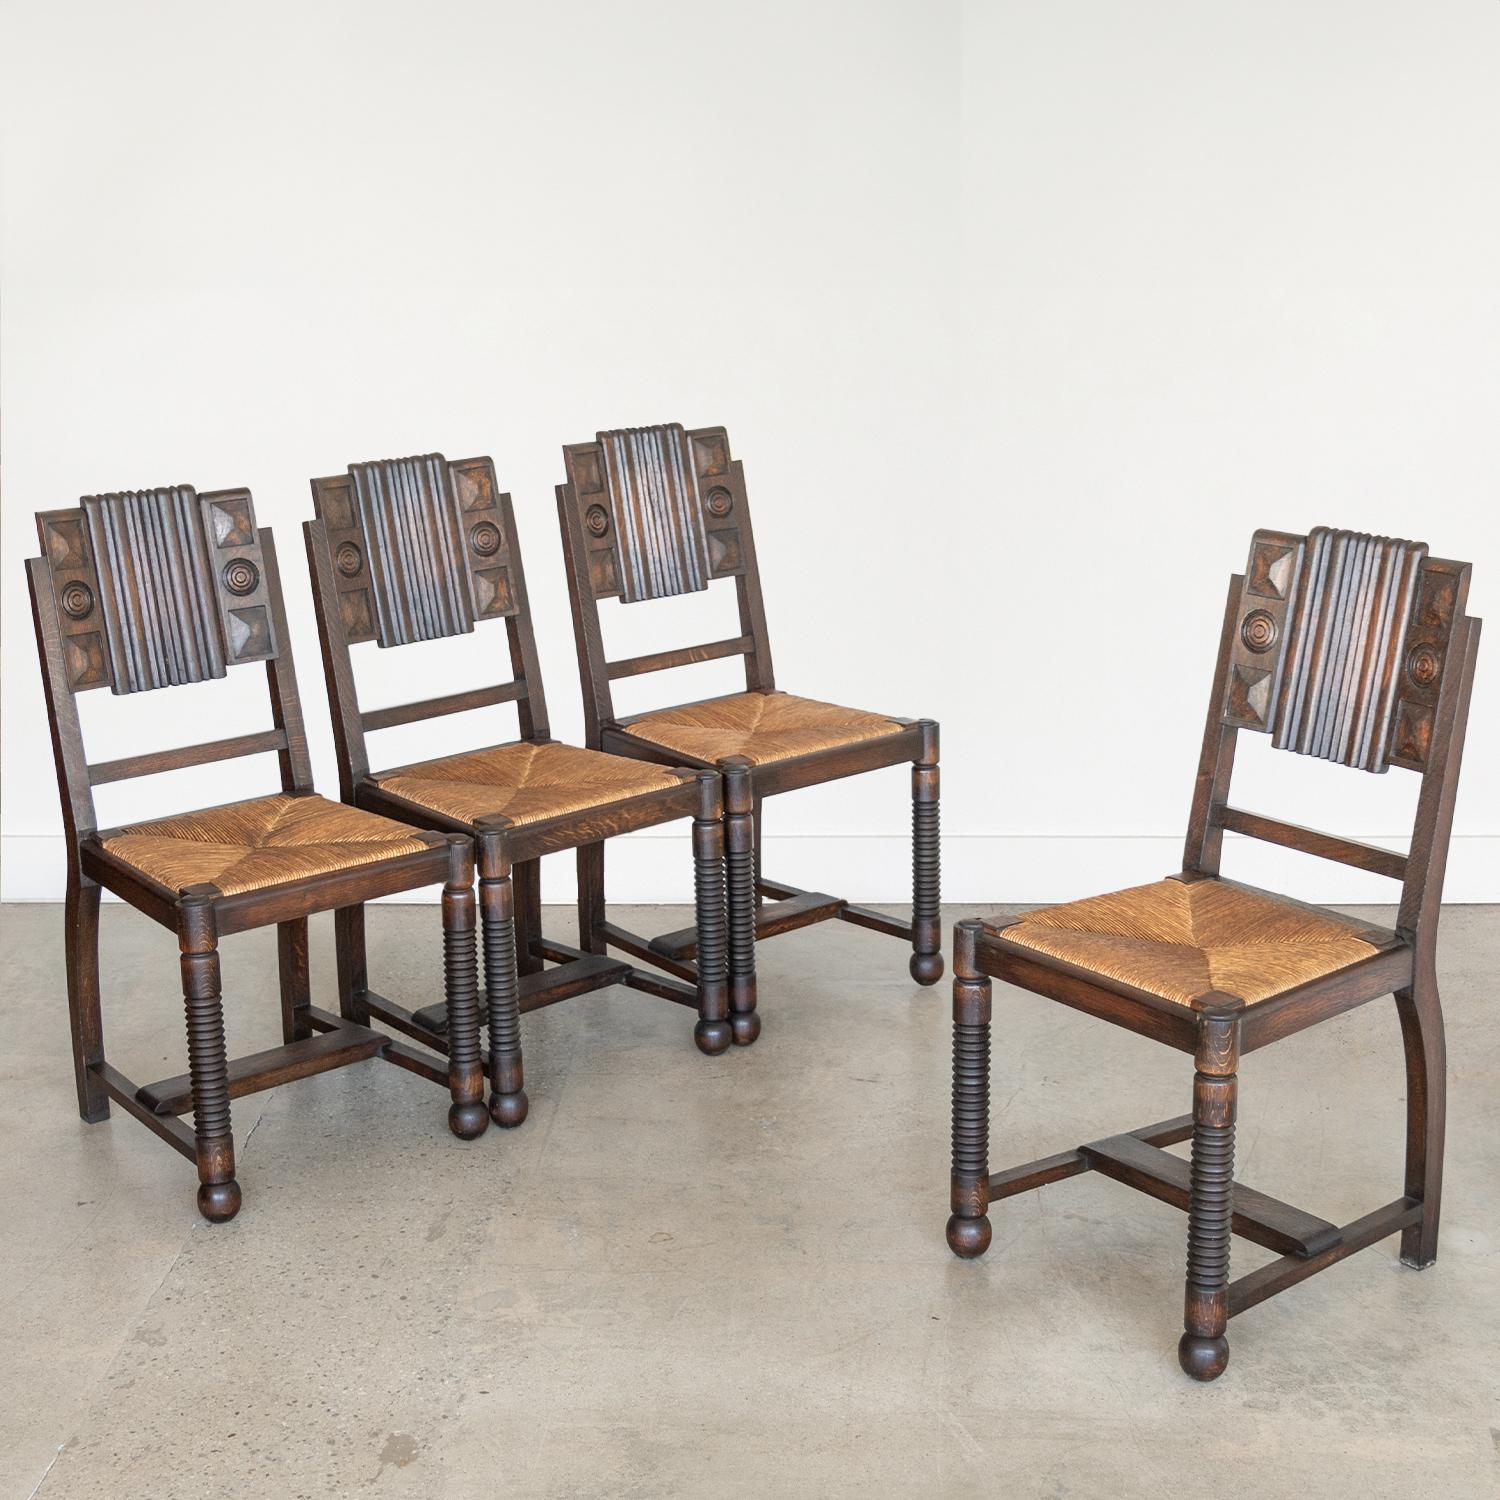 Great set of four wood and woven chairs by Charles Dudouyt from France, 1940's. Carved legs with beautiful carved wood design on backs. Original woven rush seats in great vintage condition. Original dark wood finish is in vintage condition with some